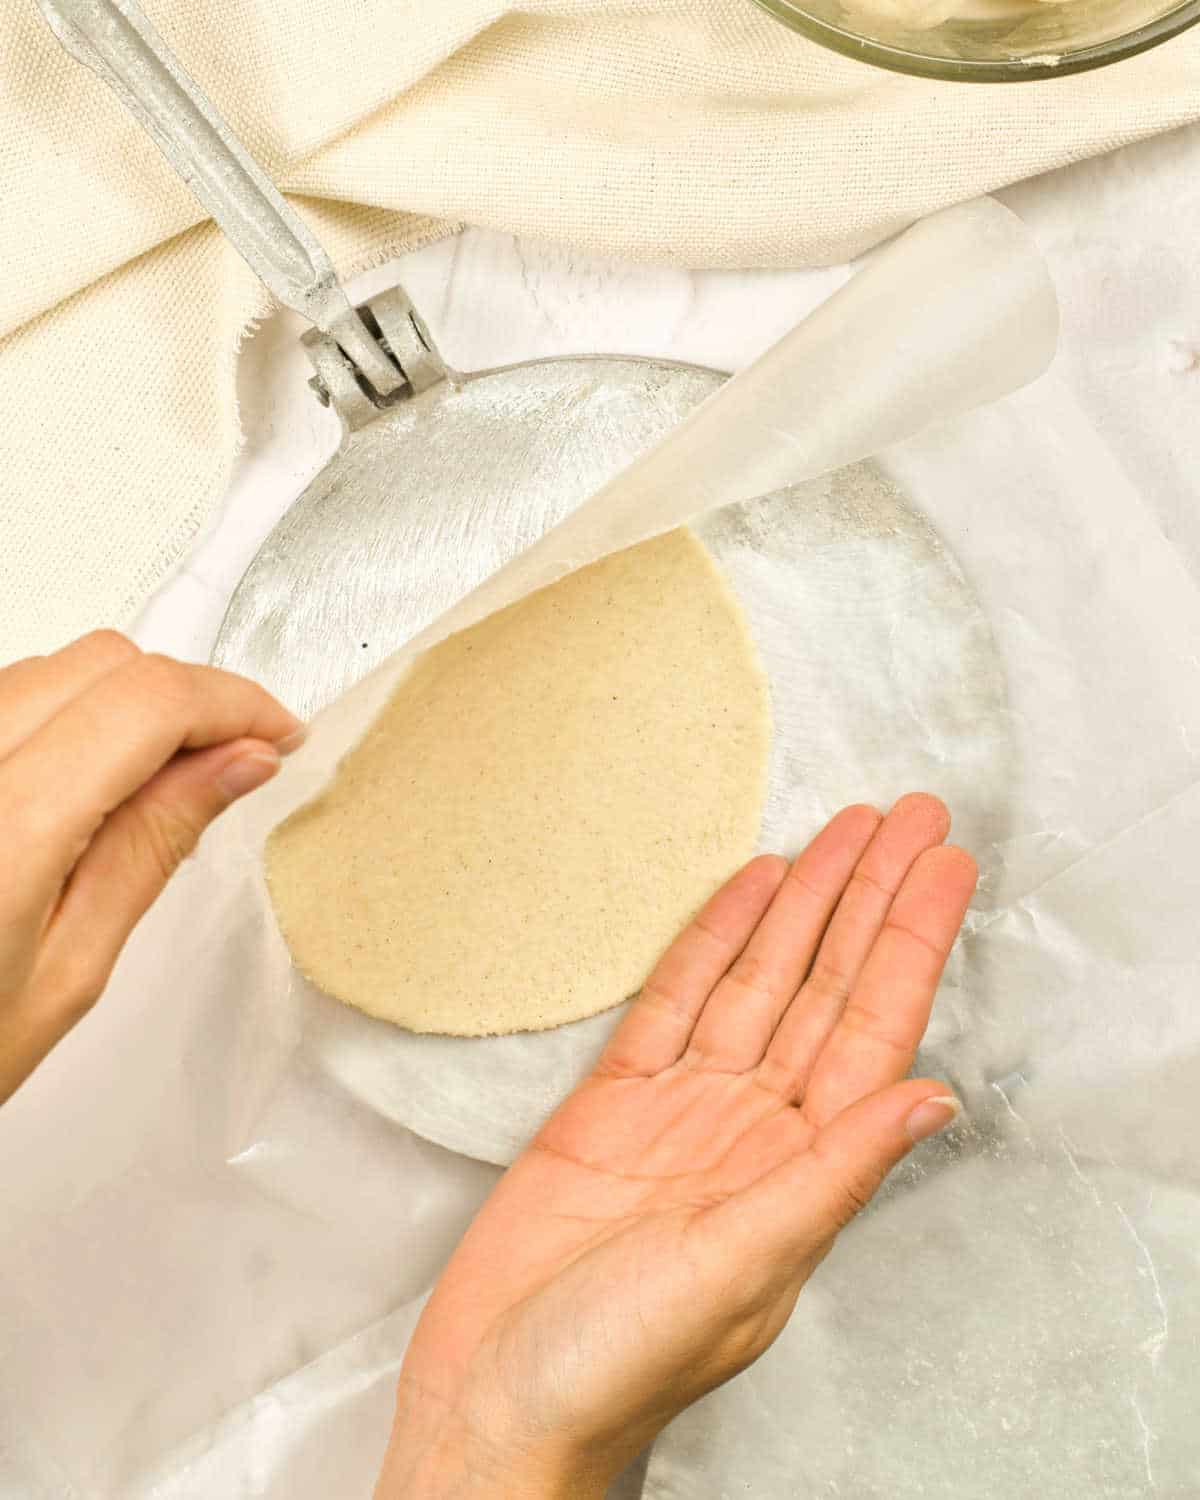 Lifting plastic sheet from a tortilla press to release the tortilla. Cream colored background.